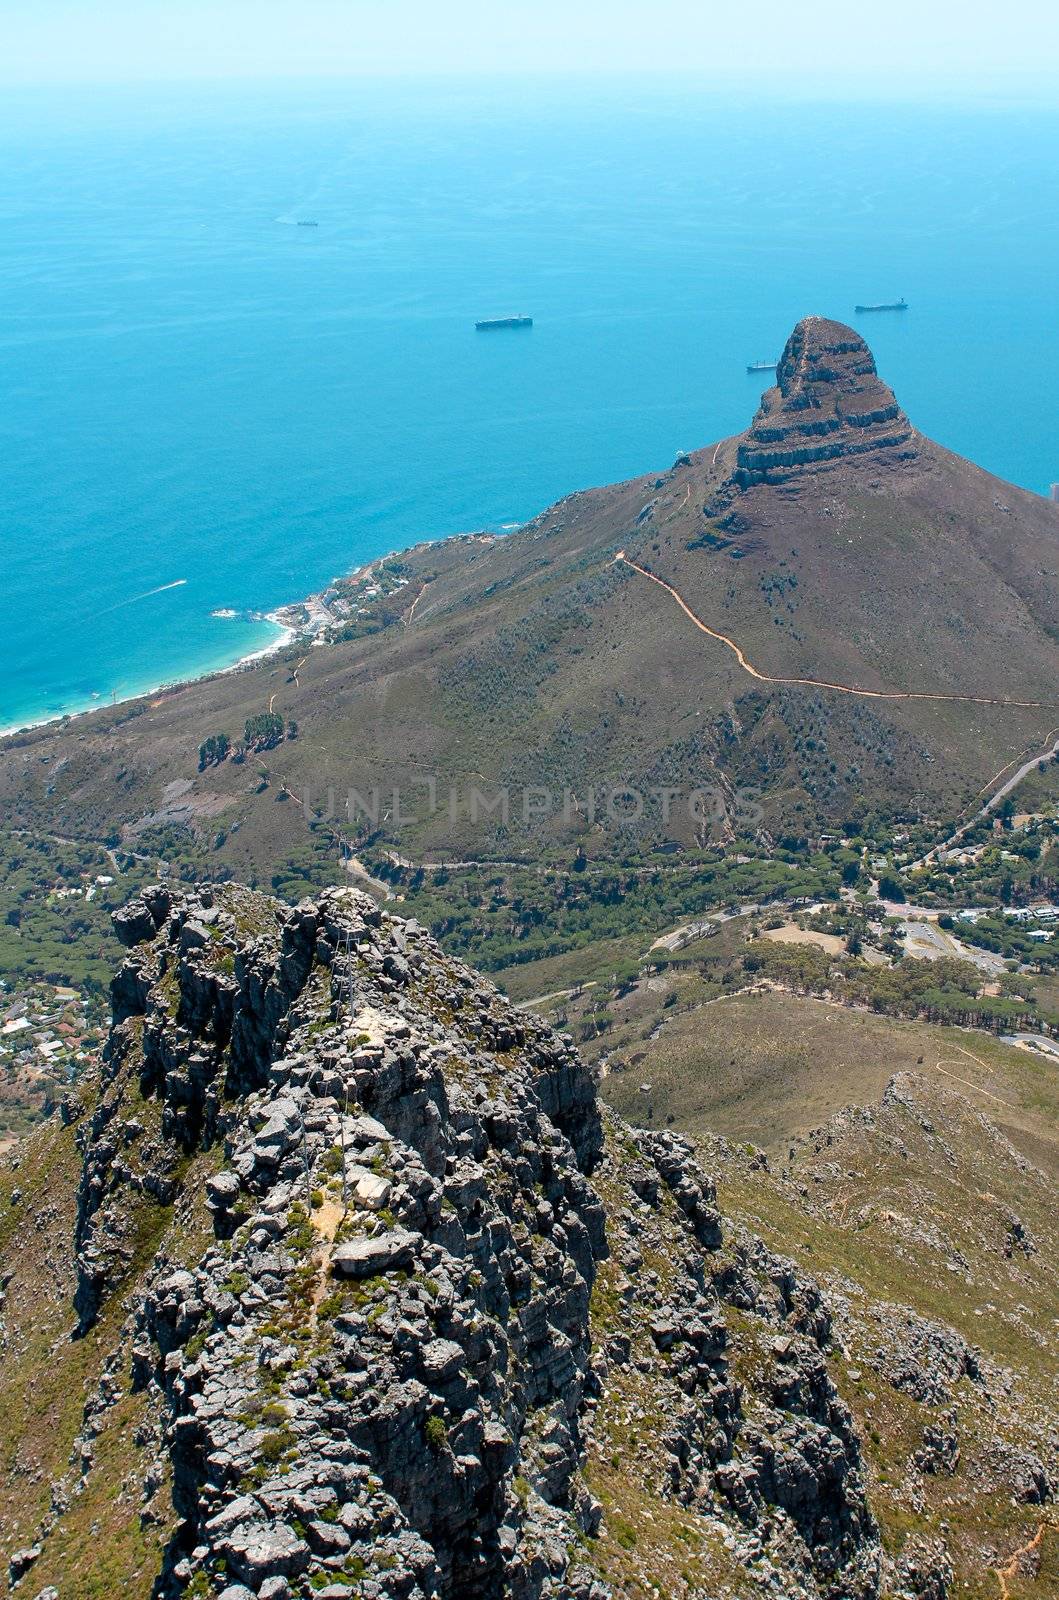 Image of lions head taken from table mountain by dwaschnig_photo